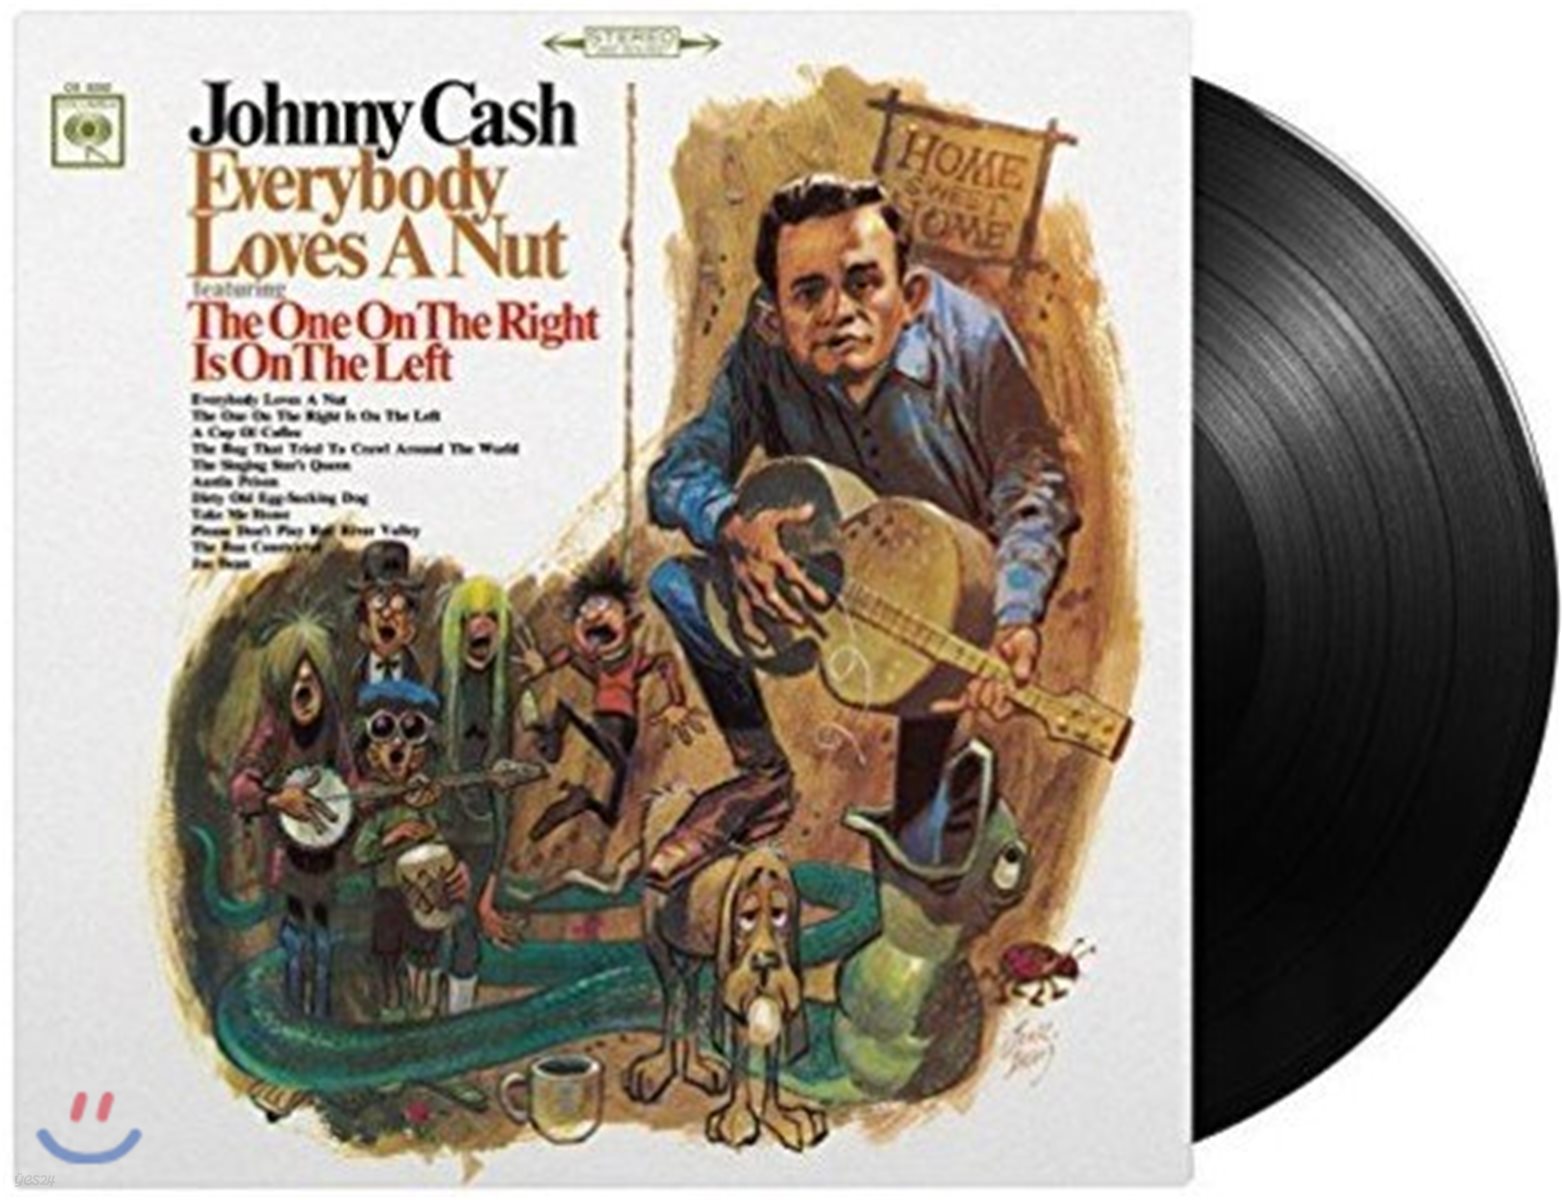 Johnny Cash (조니 캐시) - Everybody Loves A Nut [LP]